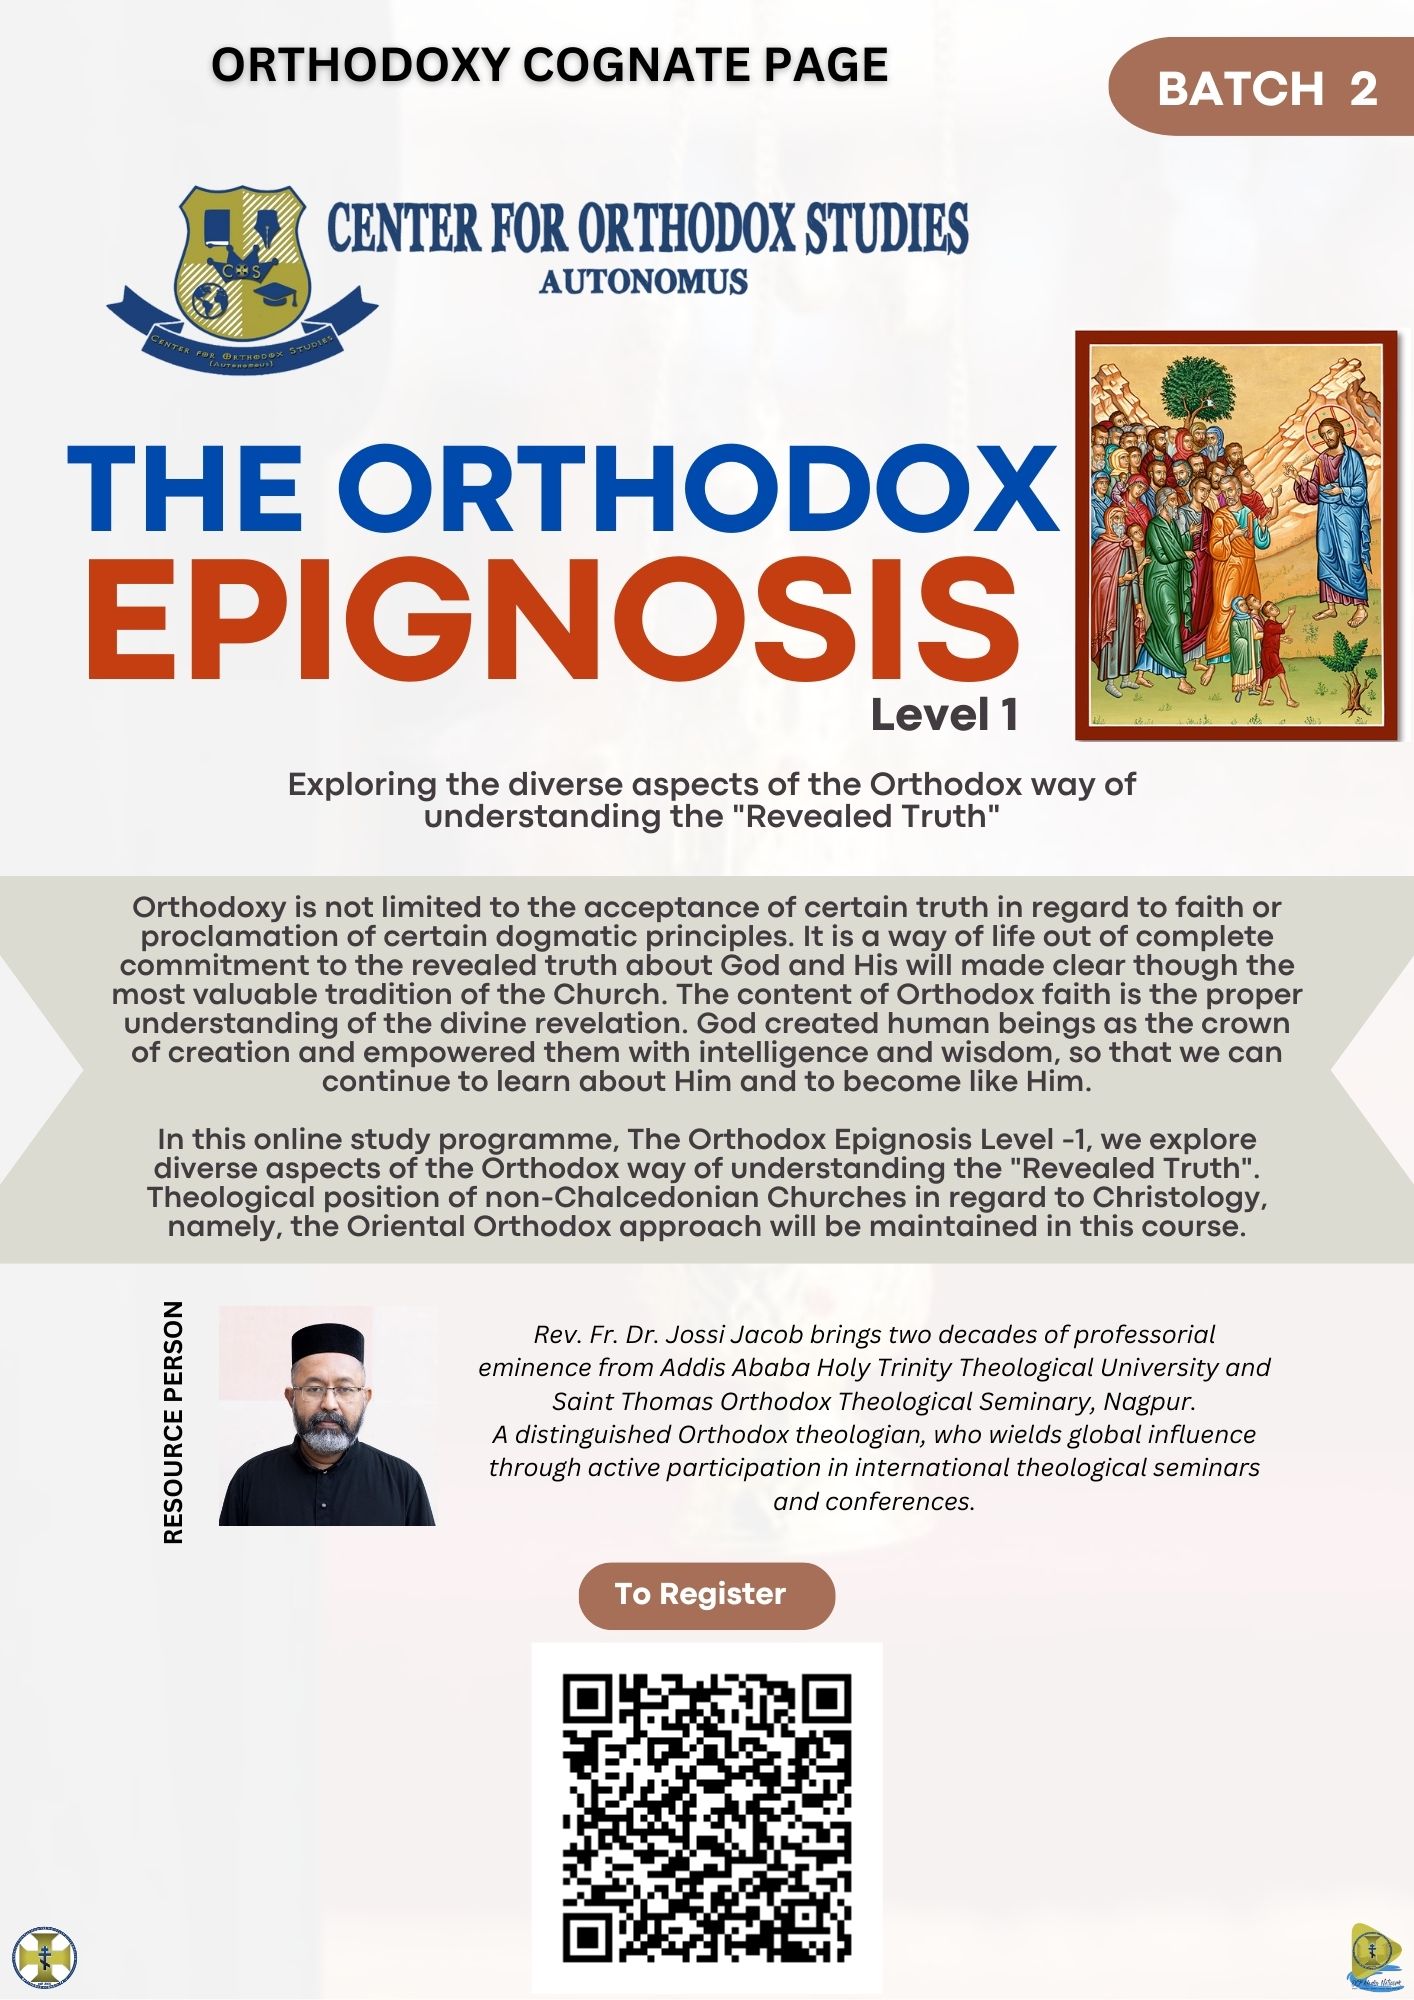 COS Launches Second Batch of ‘The Orthodox Epignosis’ Online Certificate Program – Register Now